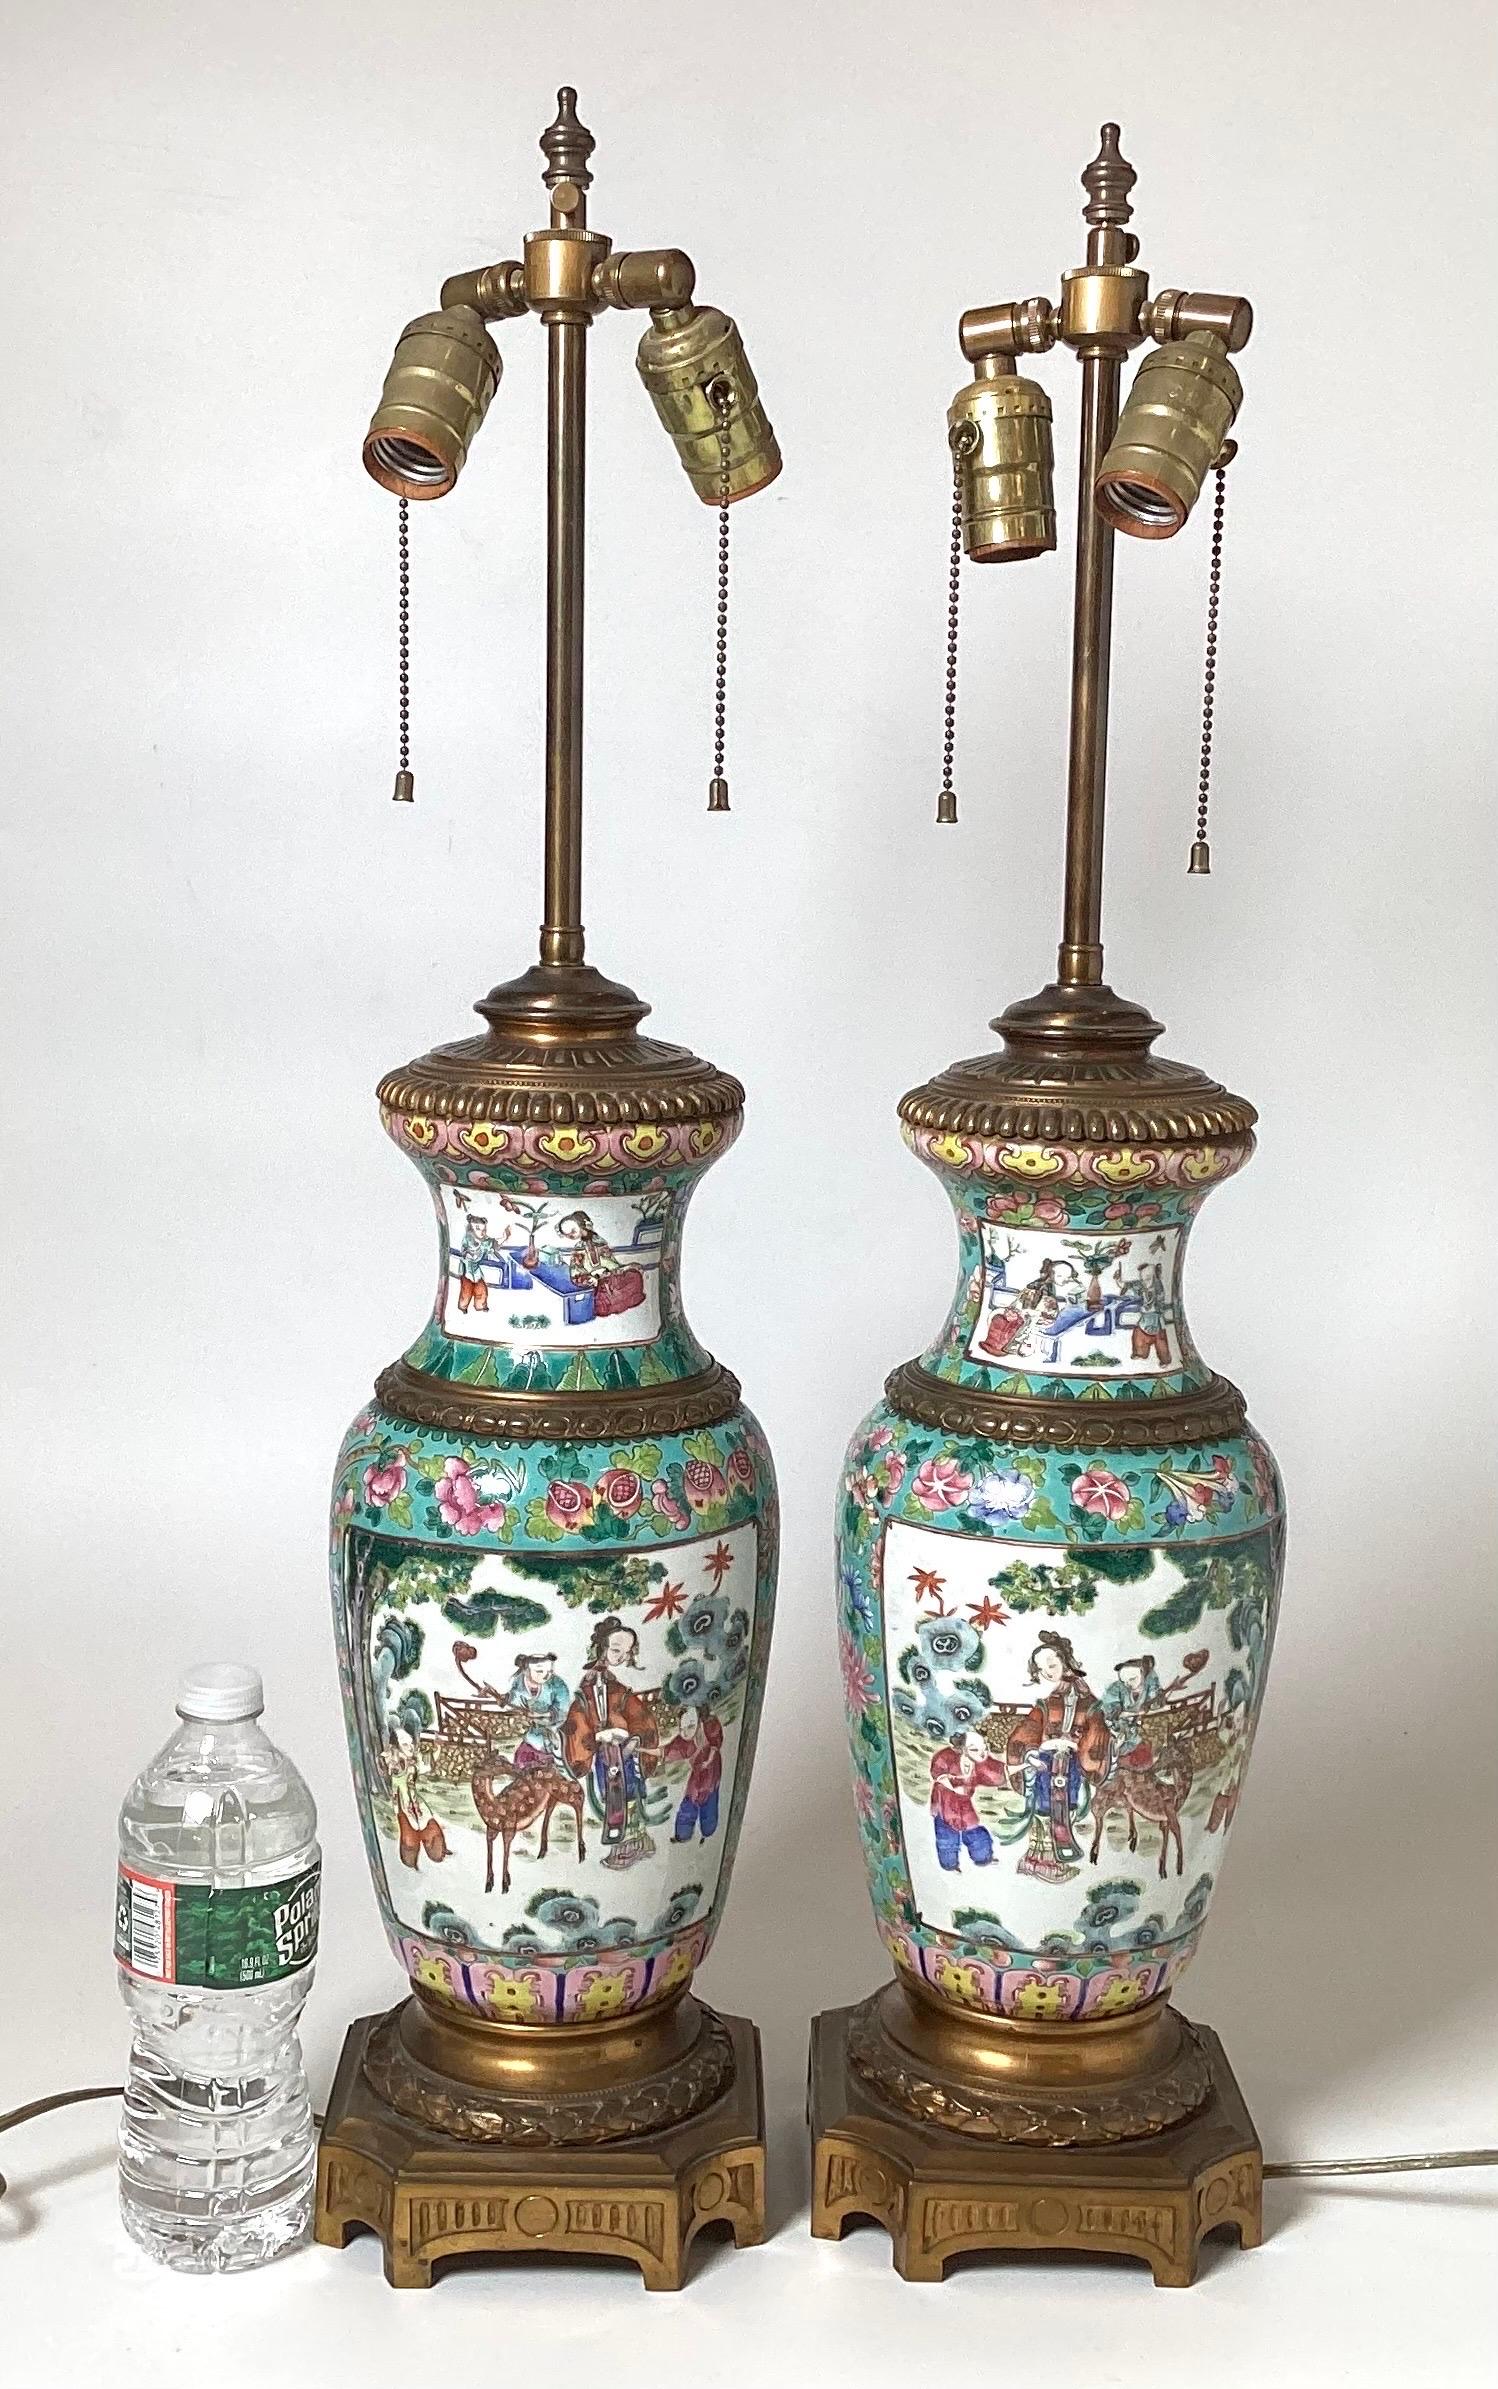 Stunning Pair of Early 19th Century Chinese Export Bronze Mounted Lamps For Sale 9